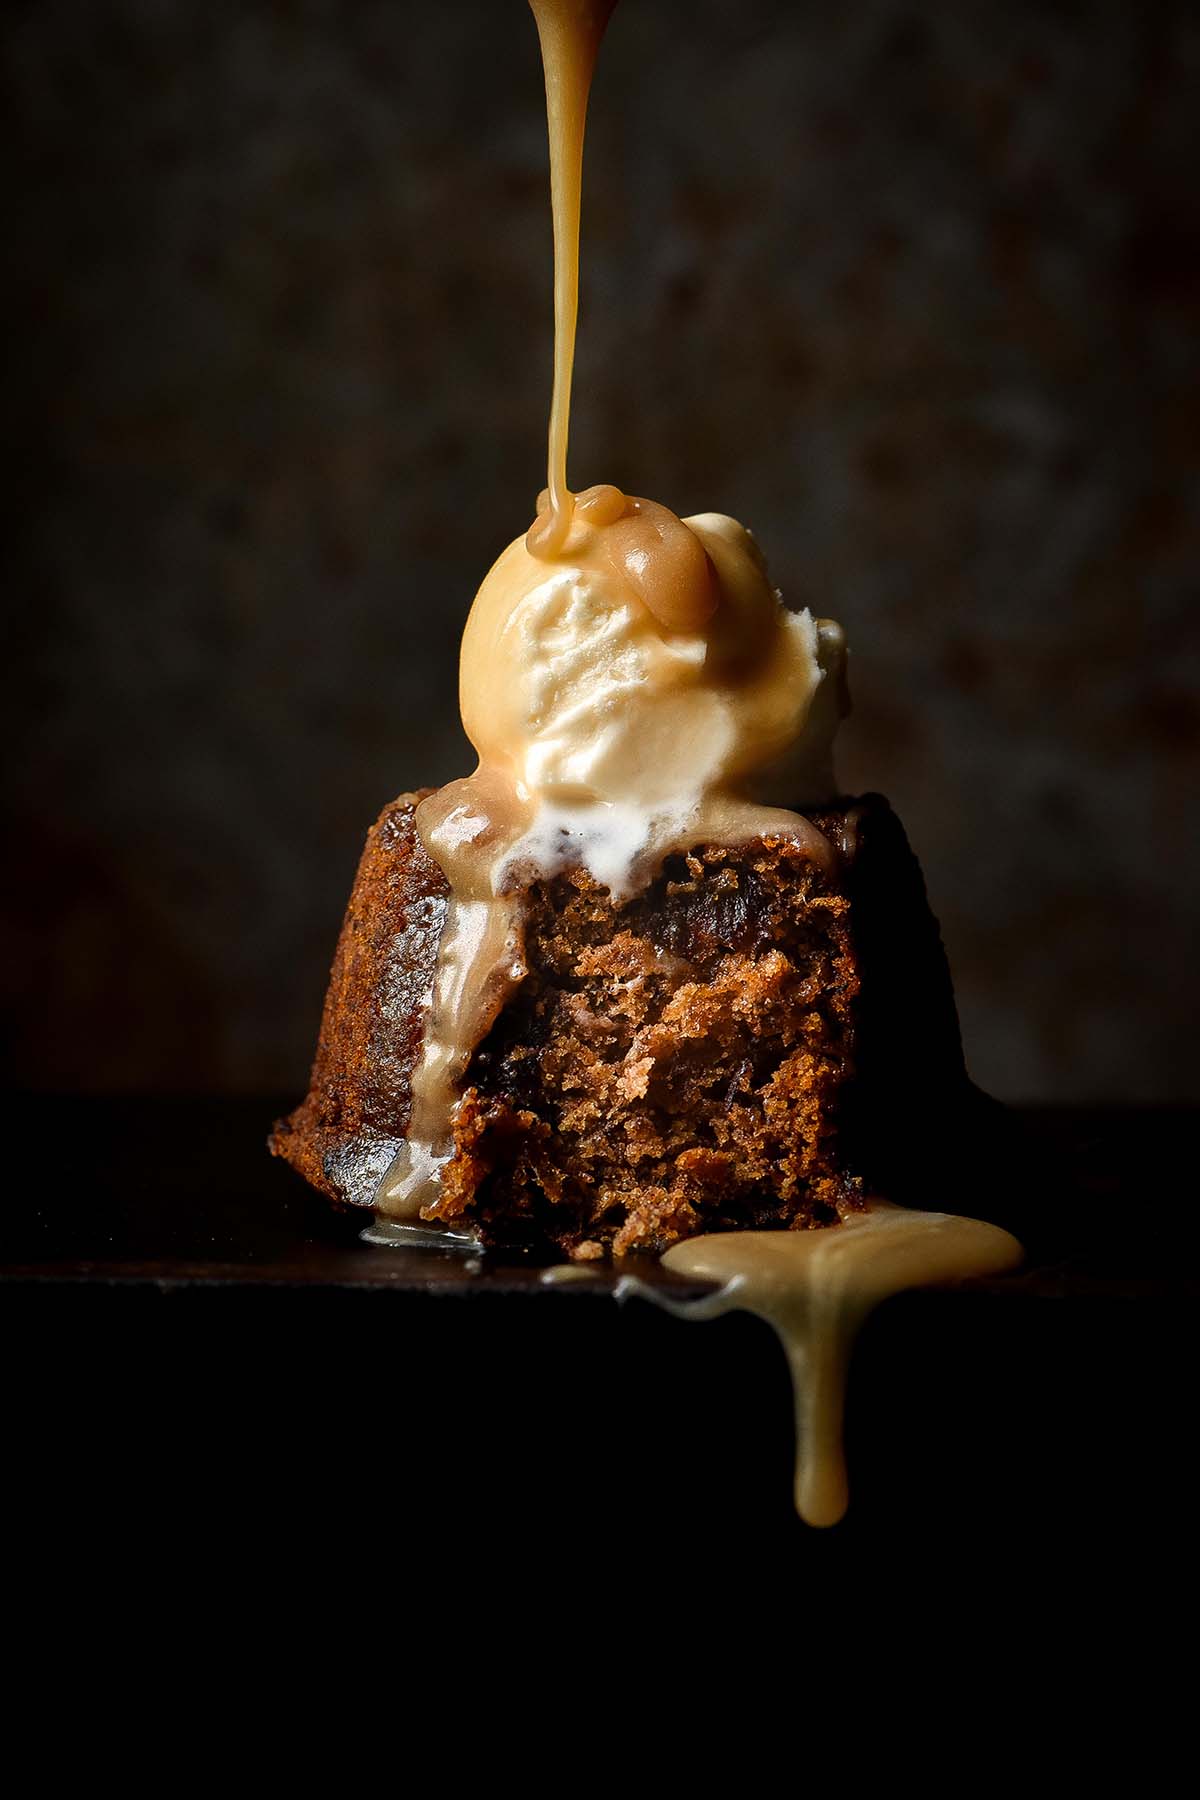 A dark and moody side on image of a gluten free sticky date pudding on a black plate against a dark steel backdrop. The pudding is topped with vanilla ice cream which is being drizzled with butterscotch sauce from above.